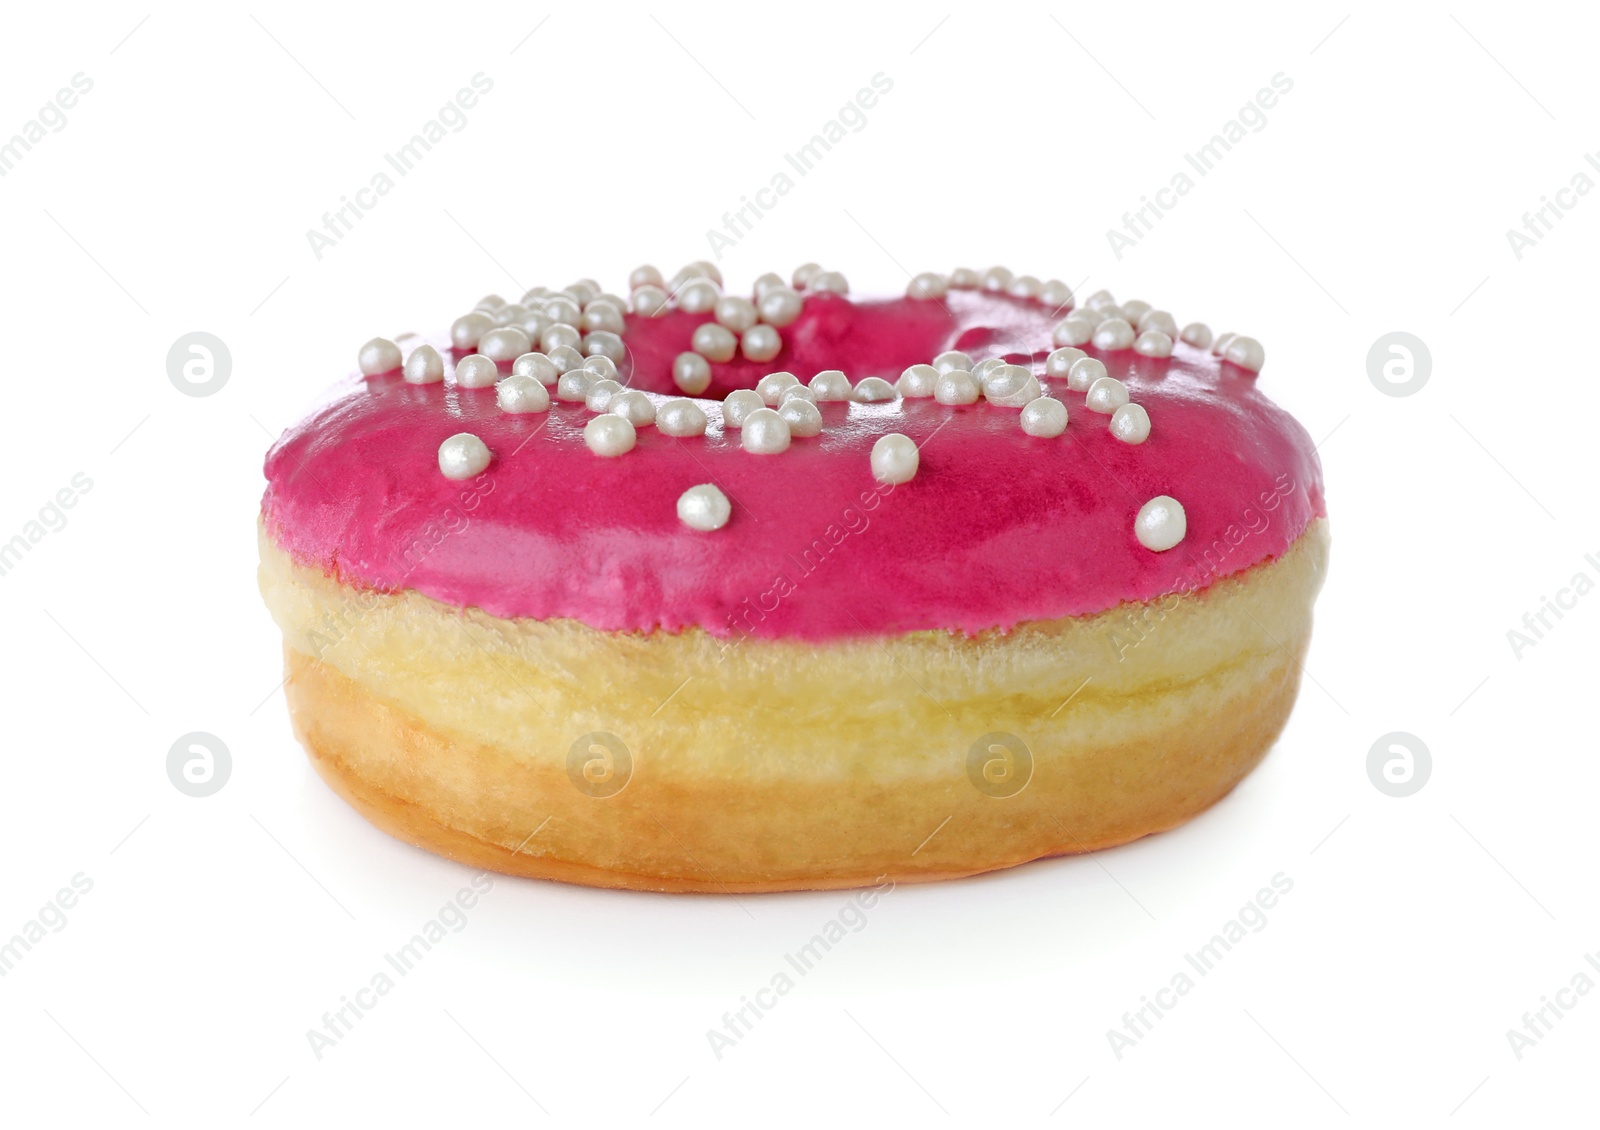 Photo of Tasty glazed donut with sprinkles isolated on white